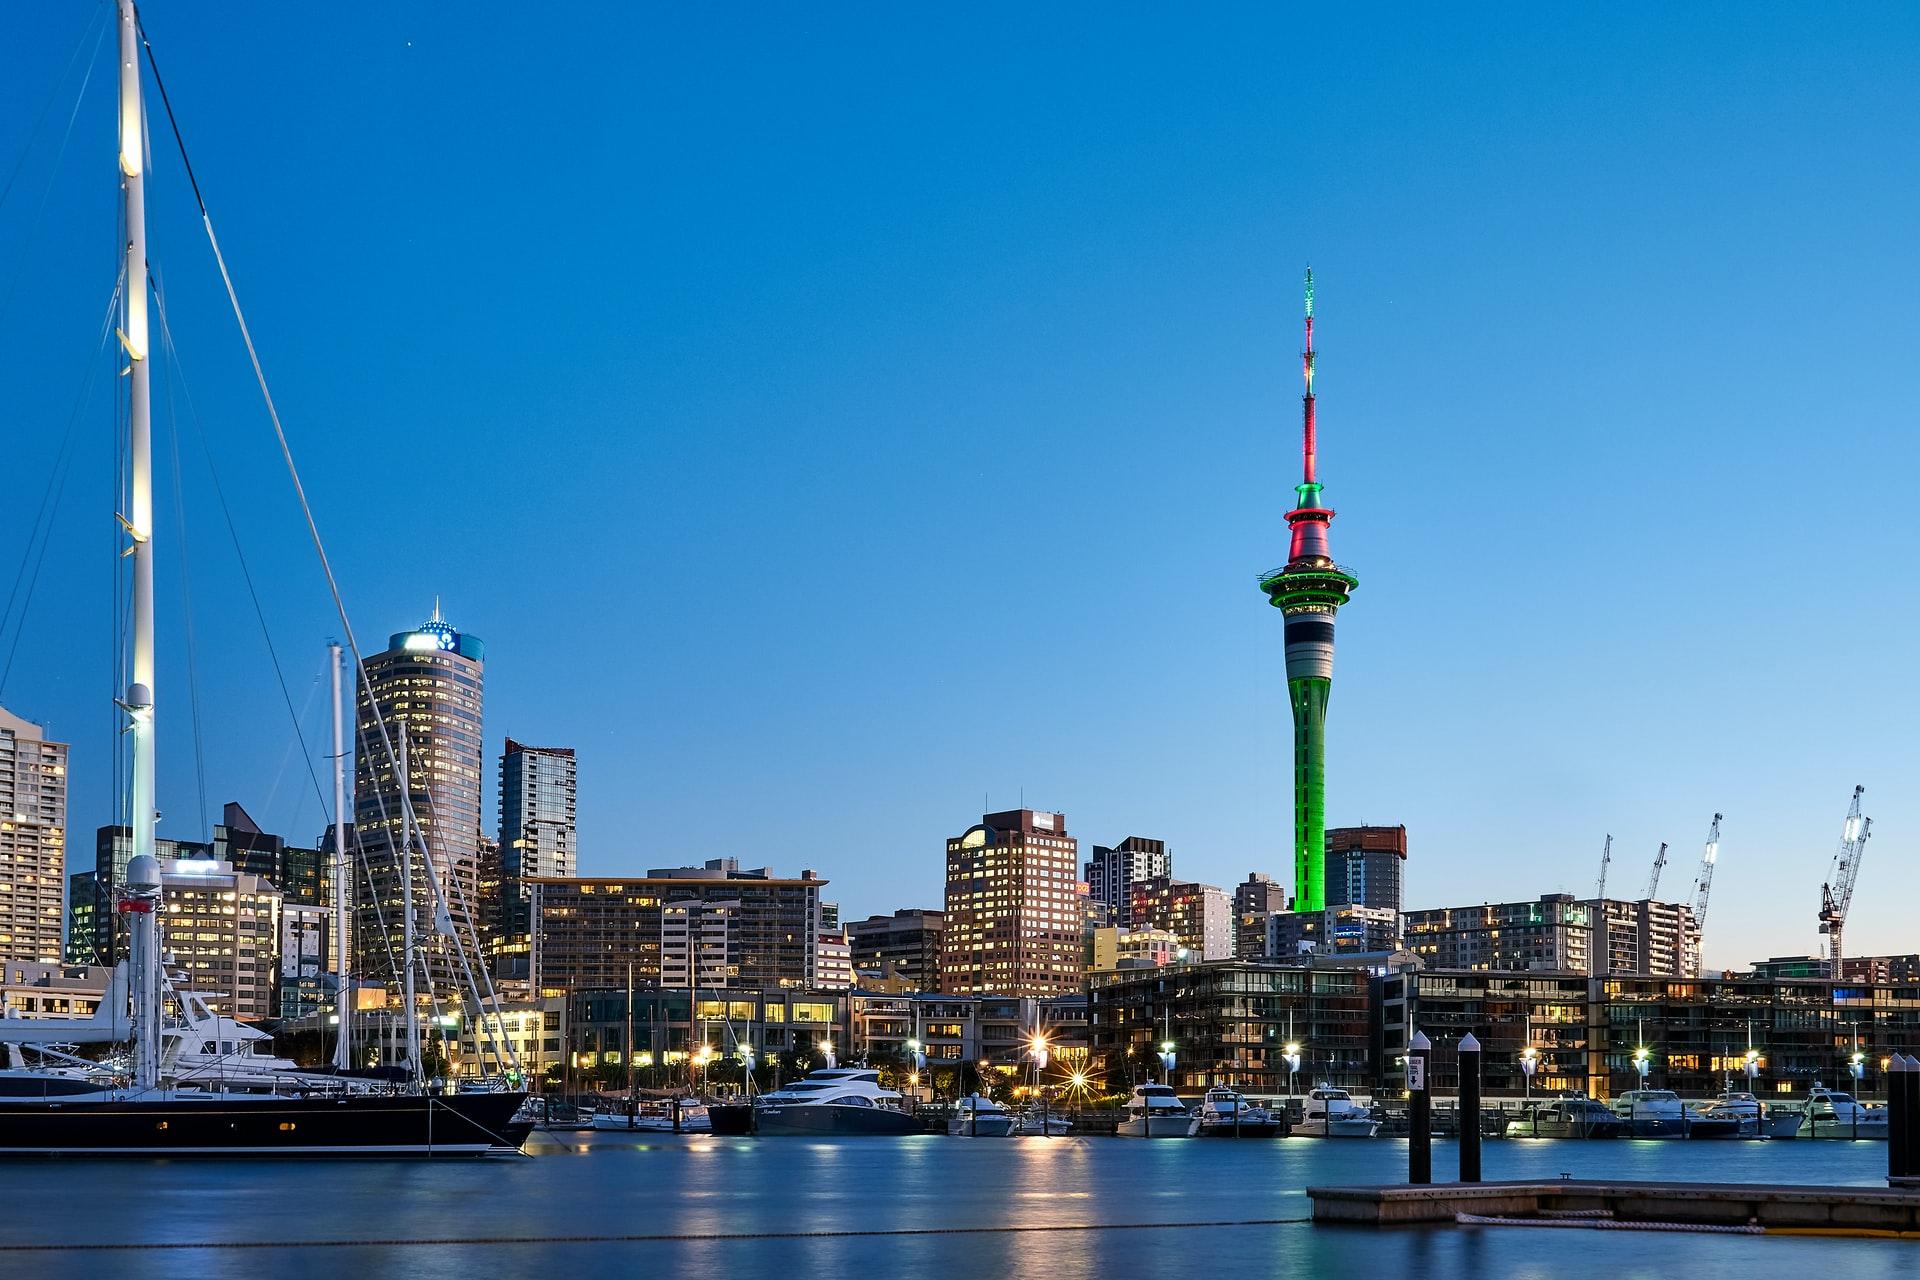 An image of the city of Auckland